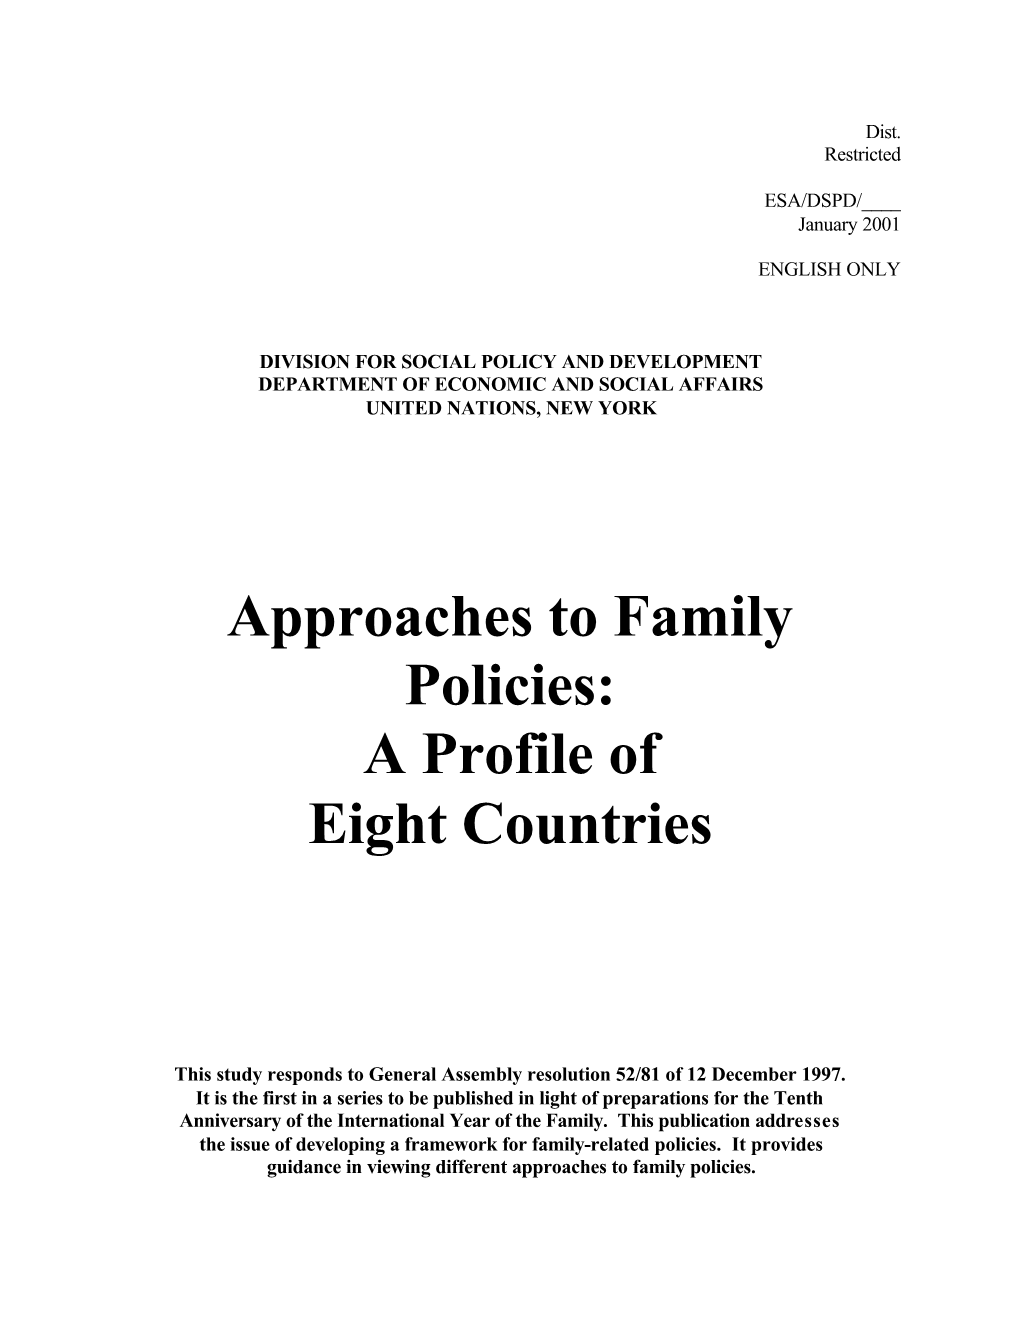 Approaches to Family Policies: a Profile of Eight Countries